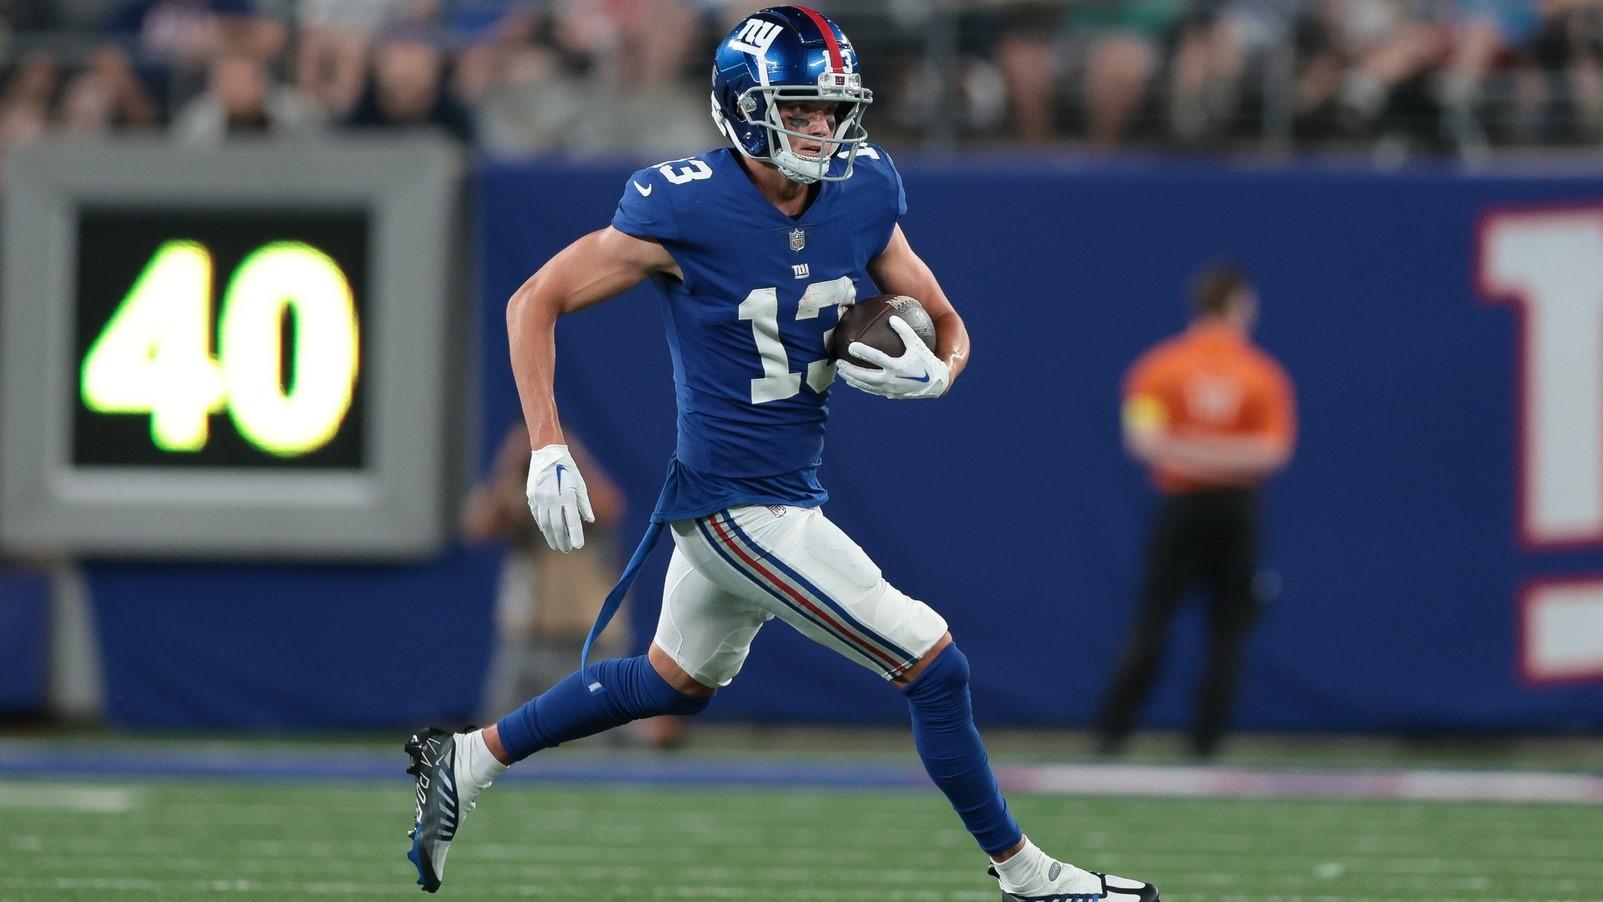 Aug 21, 2022; East Rutherford, New Jersey, USA; New York Giants wide receiver David Sills (13) gains yards after the catch during the first half against the Cincinnati Bengals at MetLife Stadium. / Vincent Carchietta-USA TODAY Sports